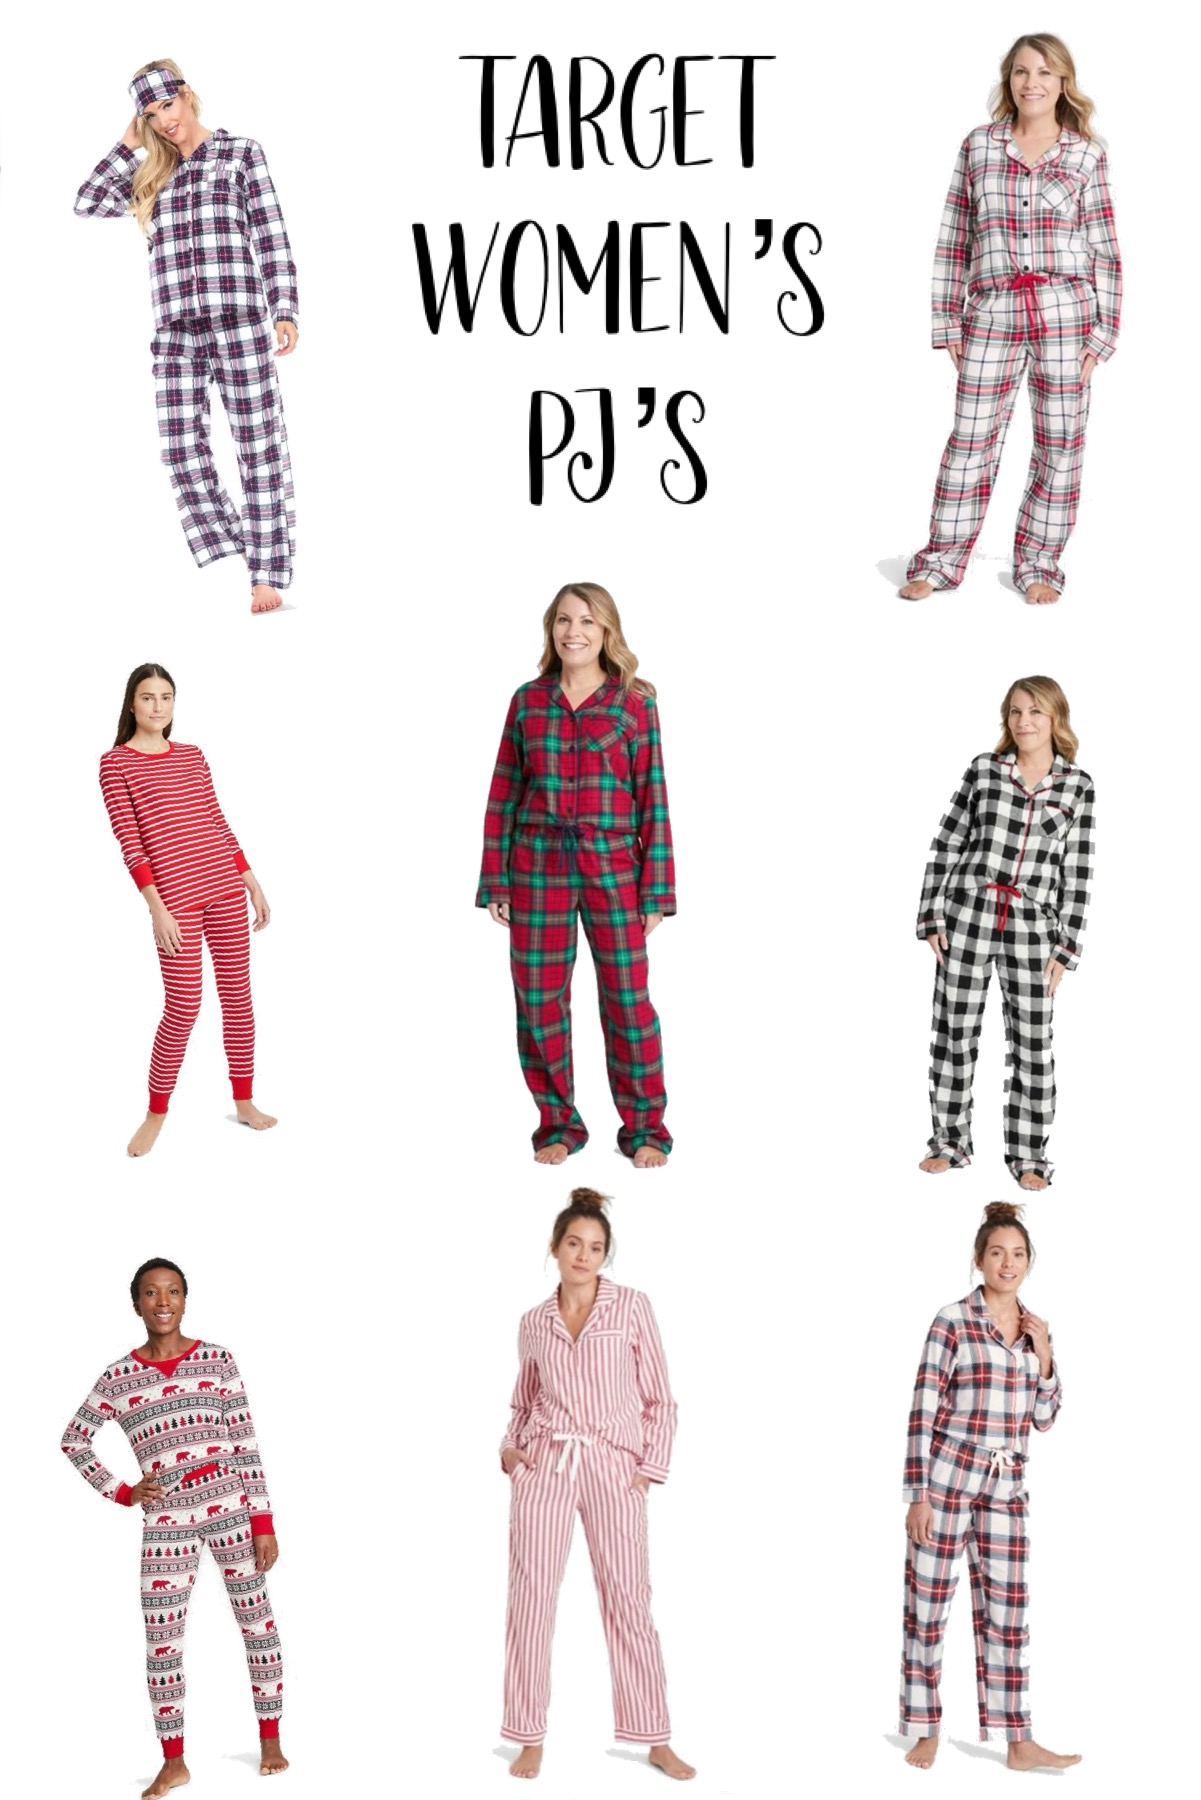 Target Women's Pj's - Daily Dose of Style